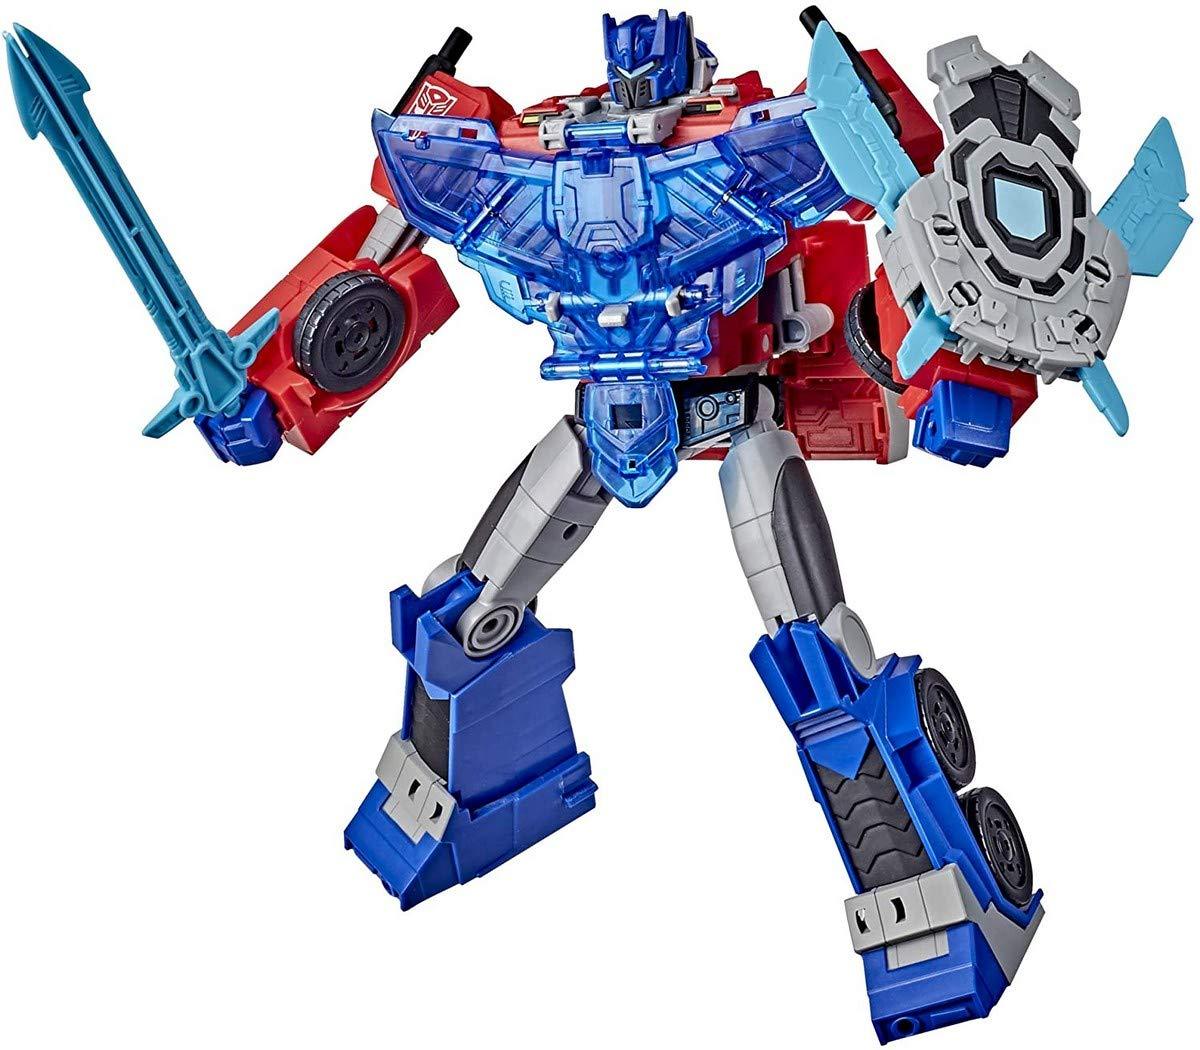 Transformers Bumblebee Cyberverse Adventures Battle Call Officer Class Optimus Prime, Voice Activated Lights And Sounds, Ages 6 And Up 10-Inch